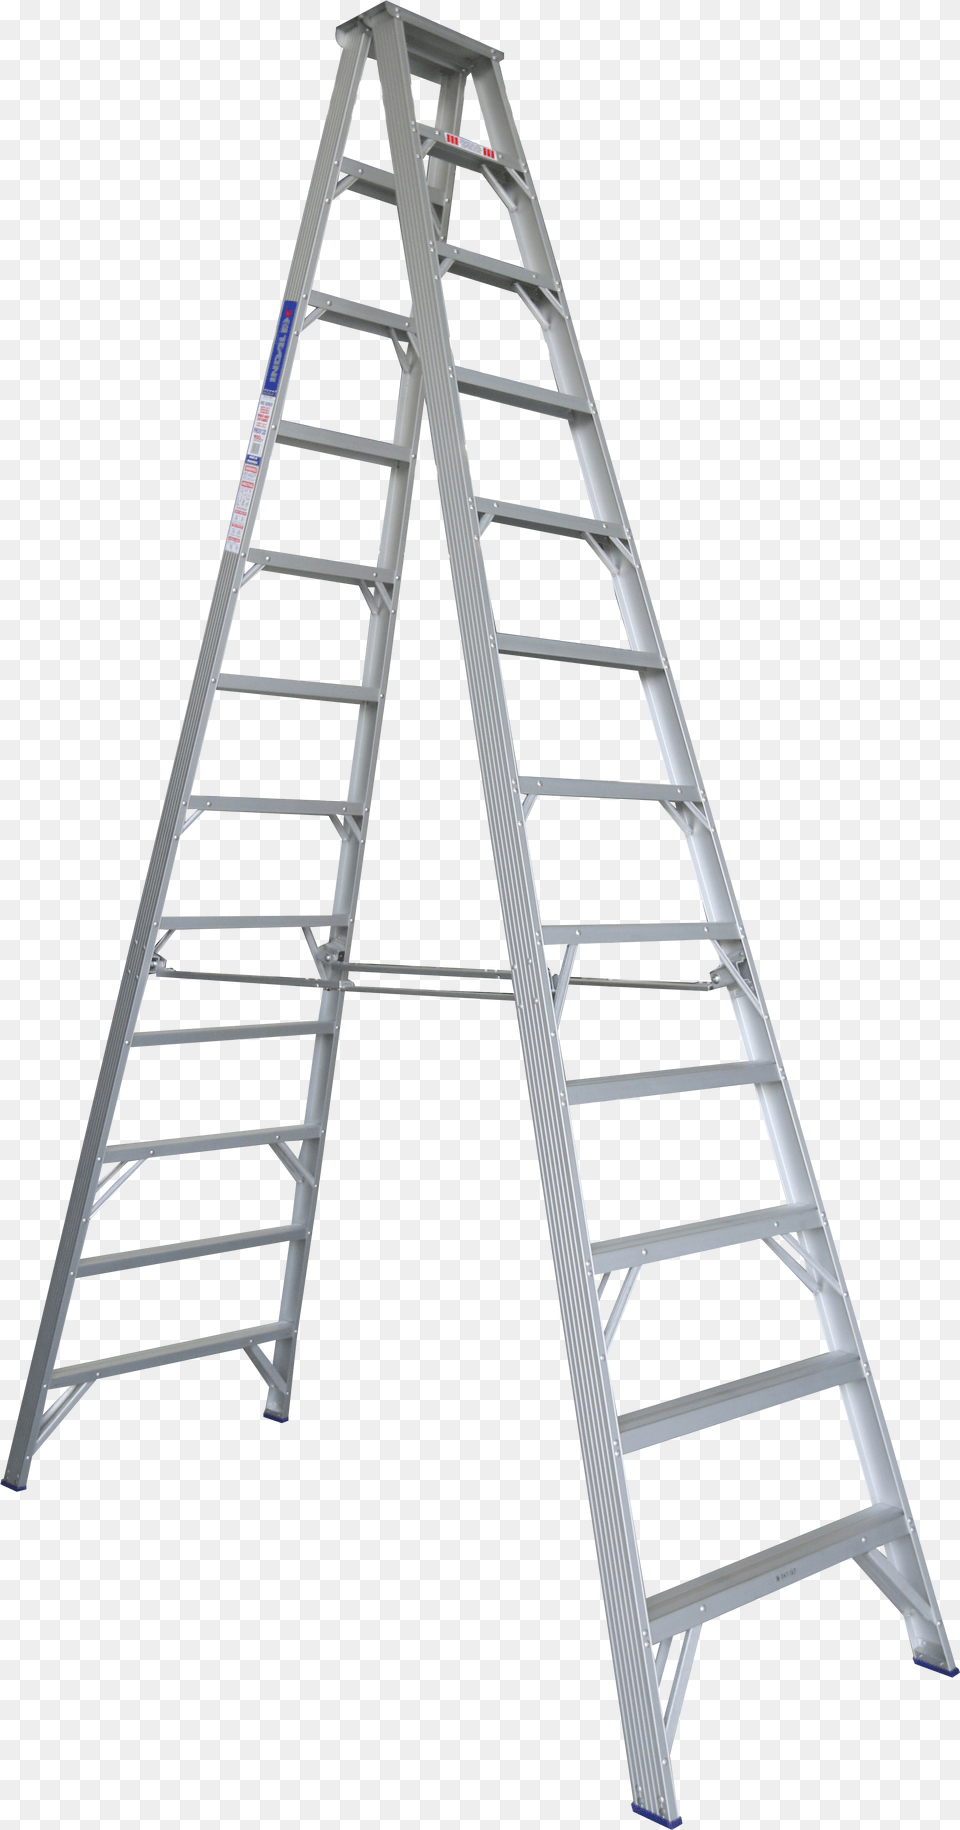 Indalex Pro Series Aluminium Double Sided Step 12ft Indalex Pro Series Aluminium Double Sided Step Ladder Free Png Download